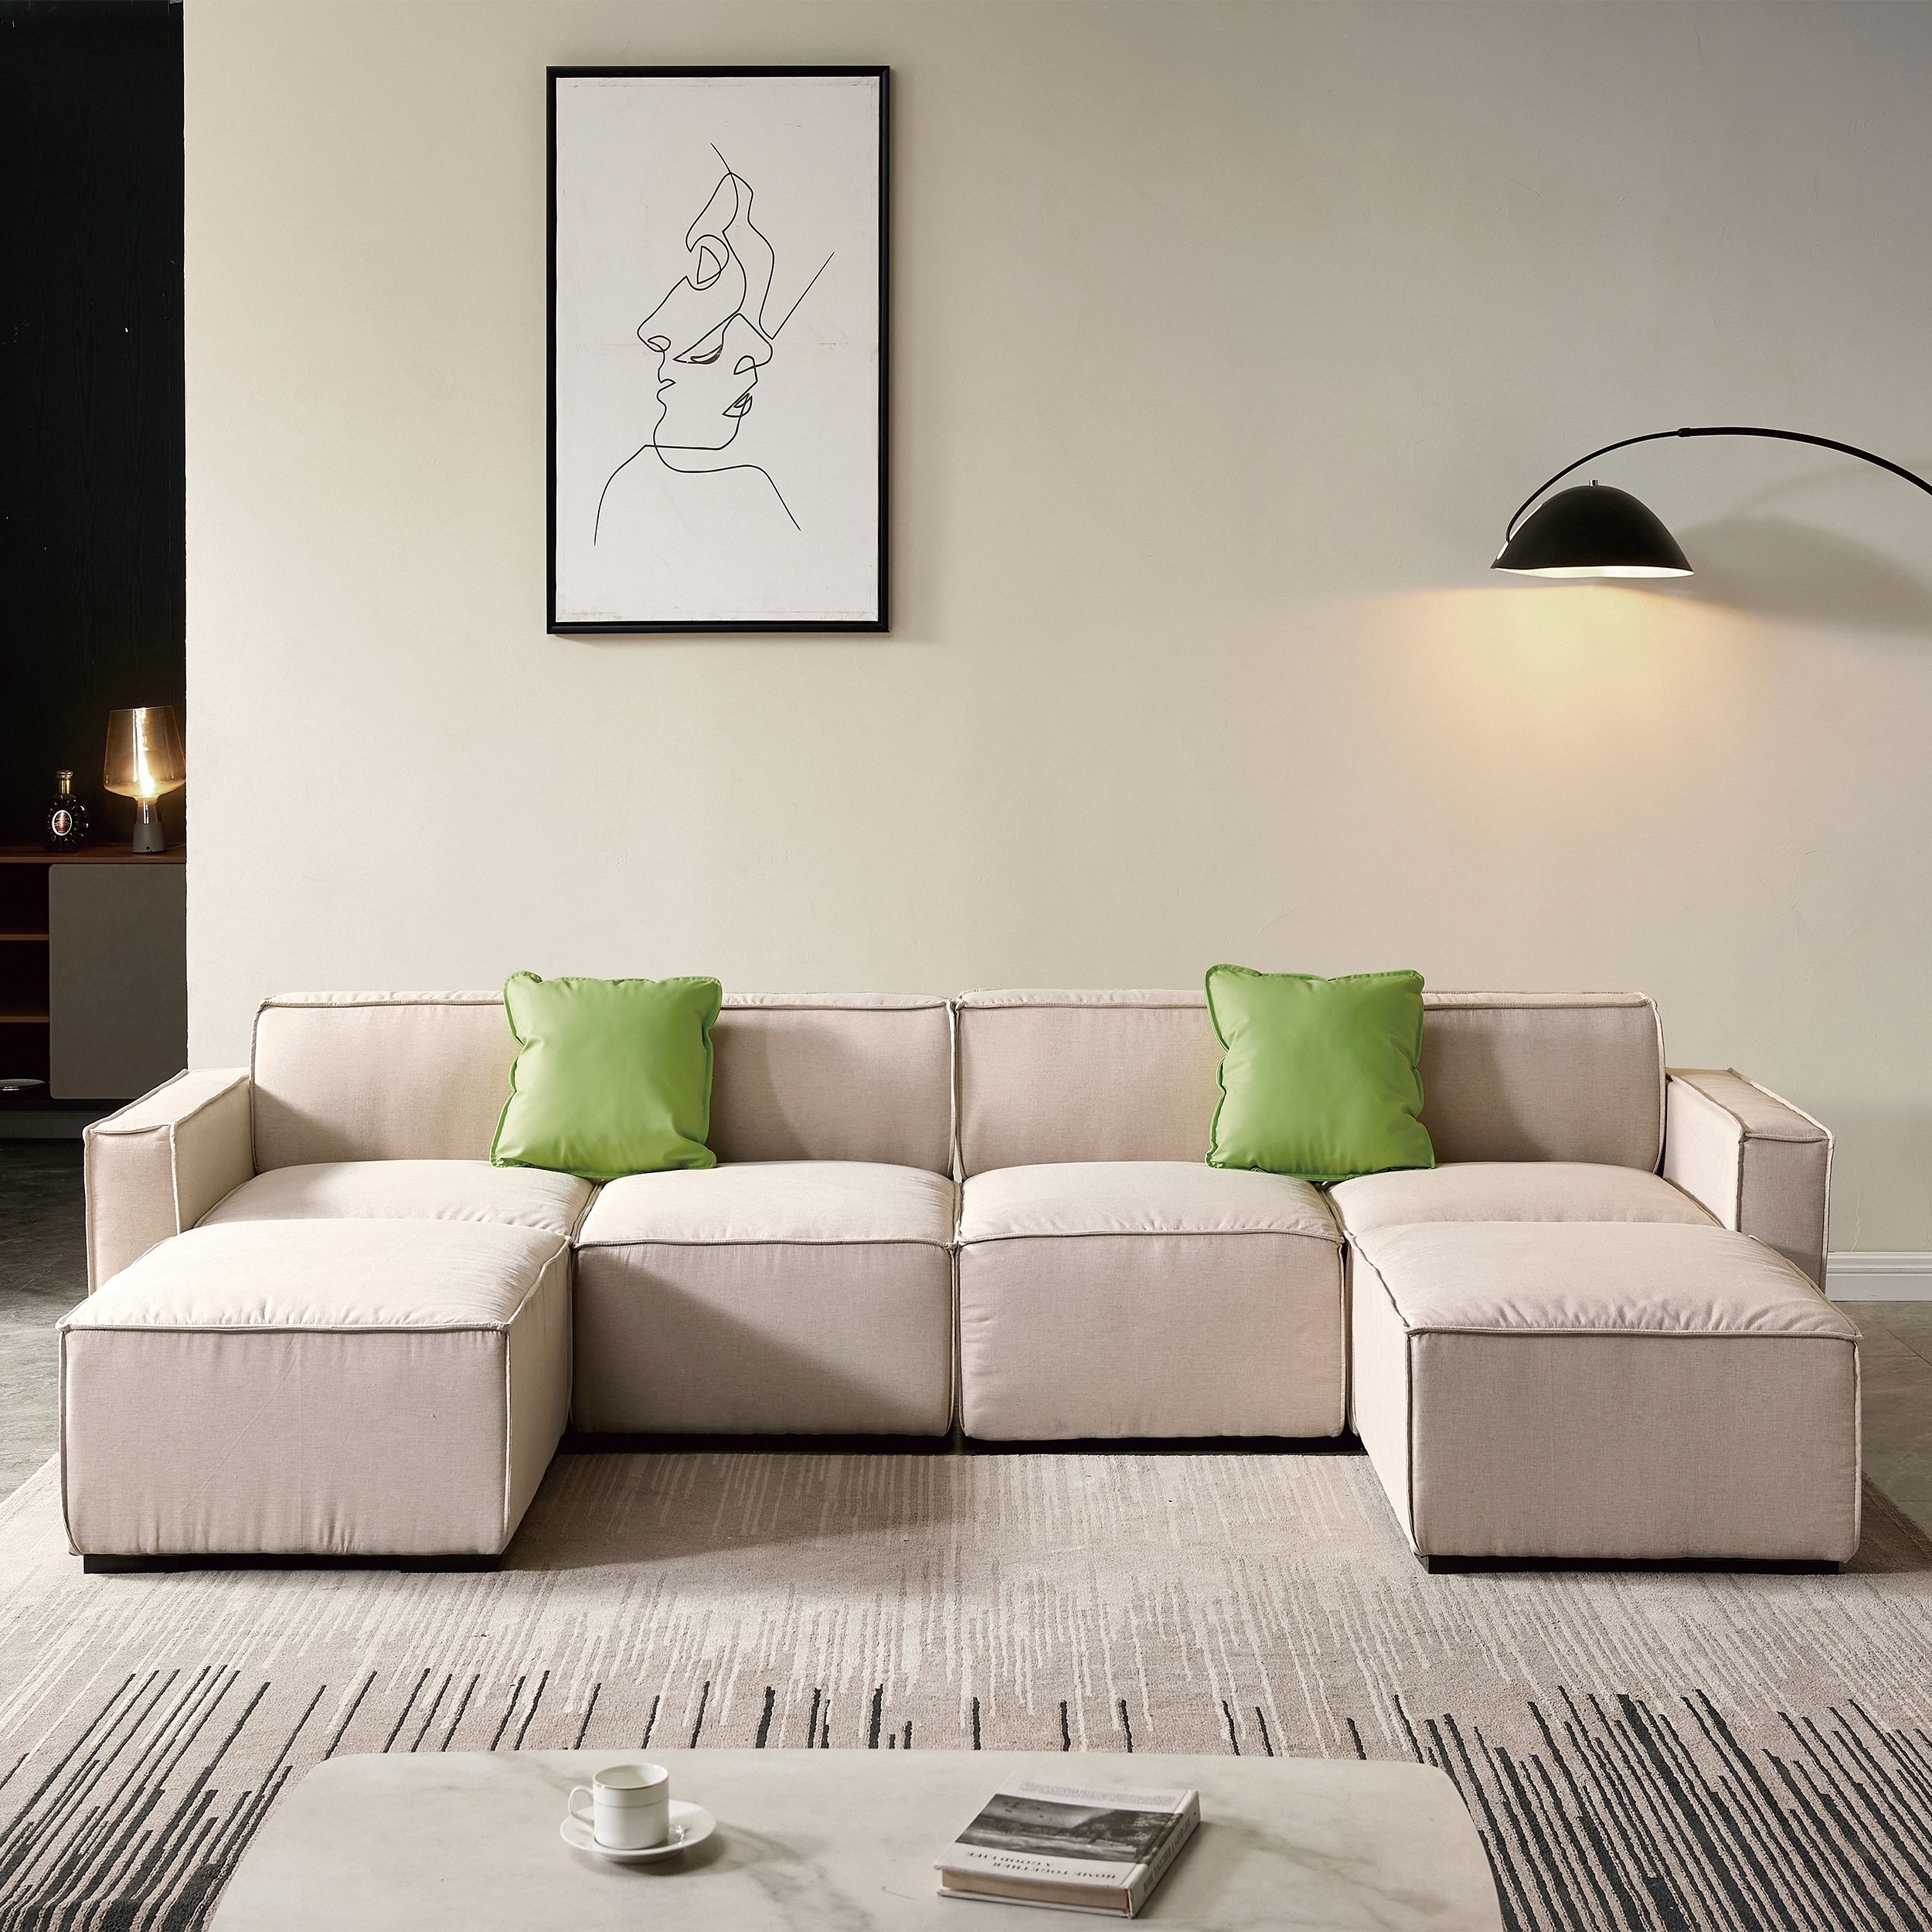 131" Convertible Modular Sectional Sofa Sets Modern U Shaped Sectional Couch  With Removable Ottomans For Living Room – Bed Bath & Beyond – 38149280 With Regard To Modern U Shaped Sectional Couch Sets (View 10 of 15)